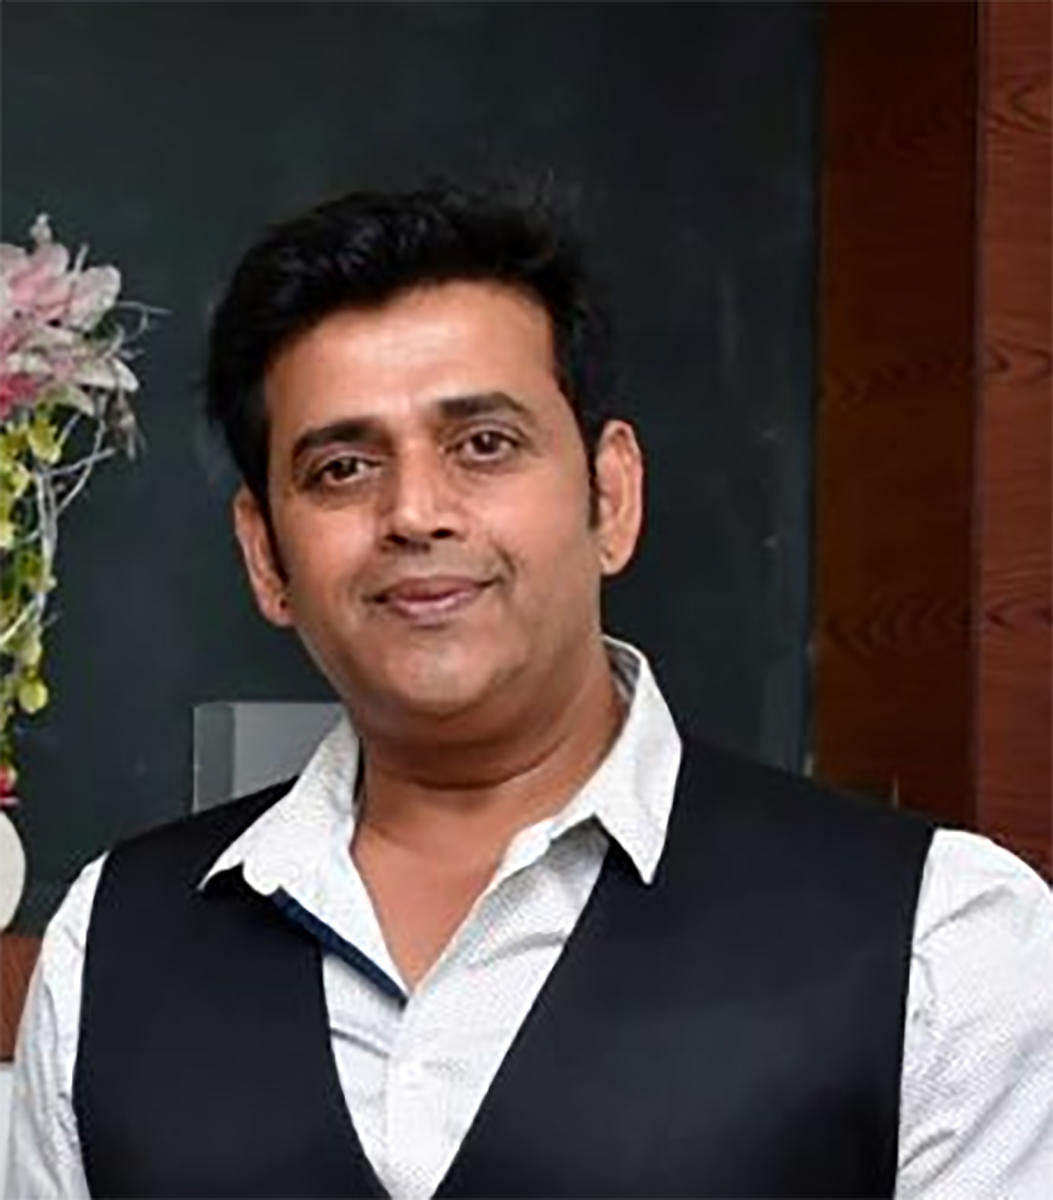 "I want to become a serious politician like N T Rama Rao and Vinod Khanna who were from the film industry but joined politics and worked with utmost seriousness," Kishan said. File photo